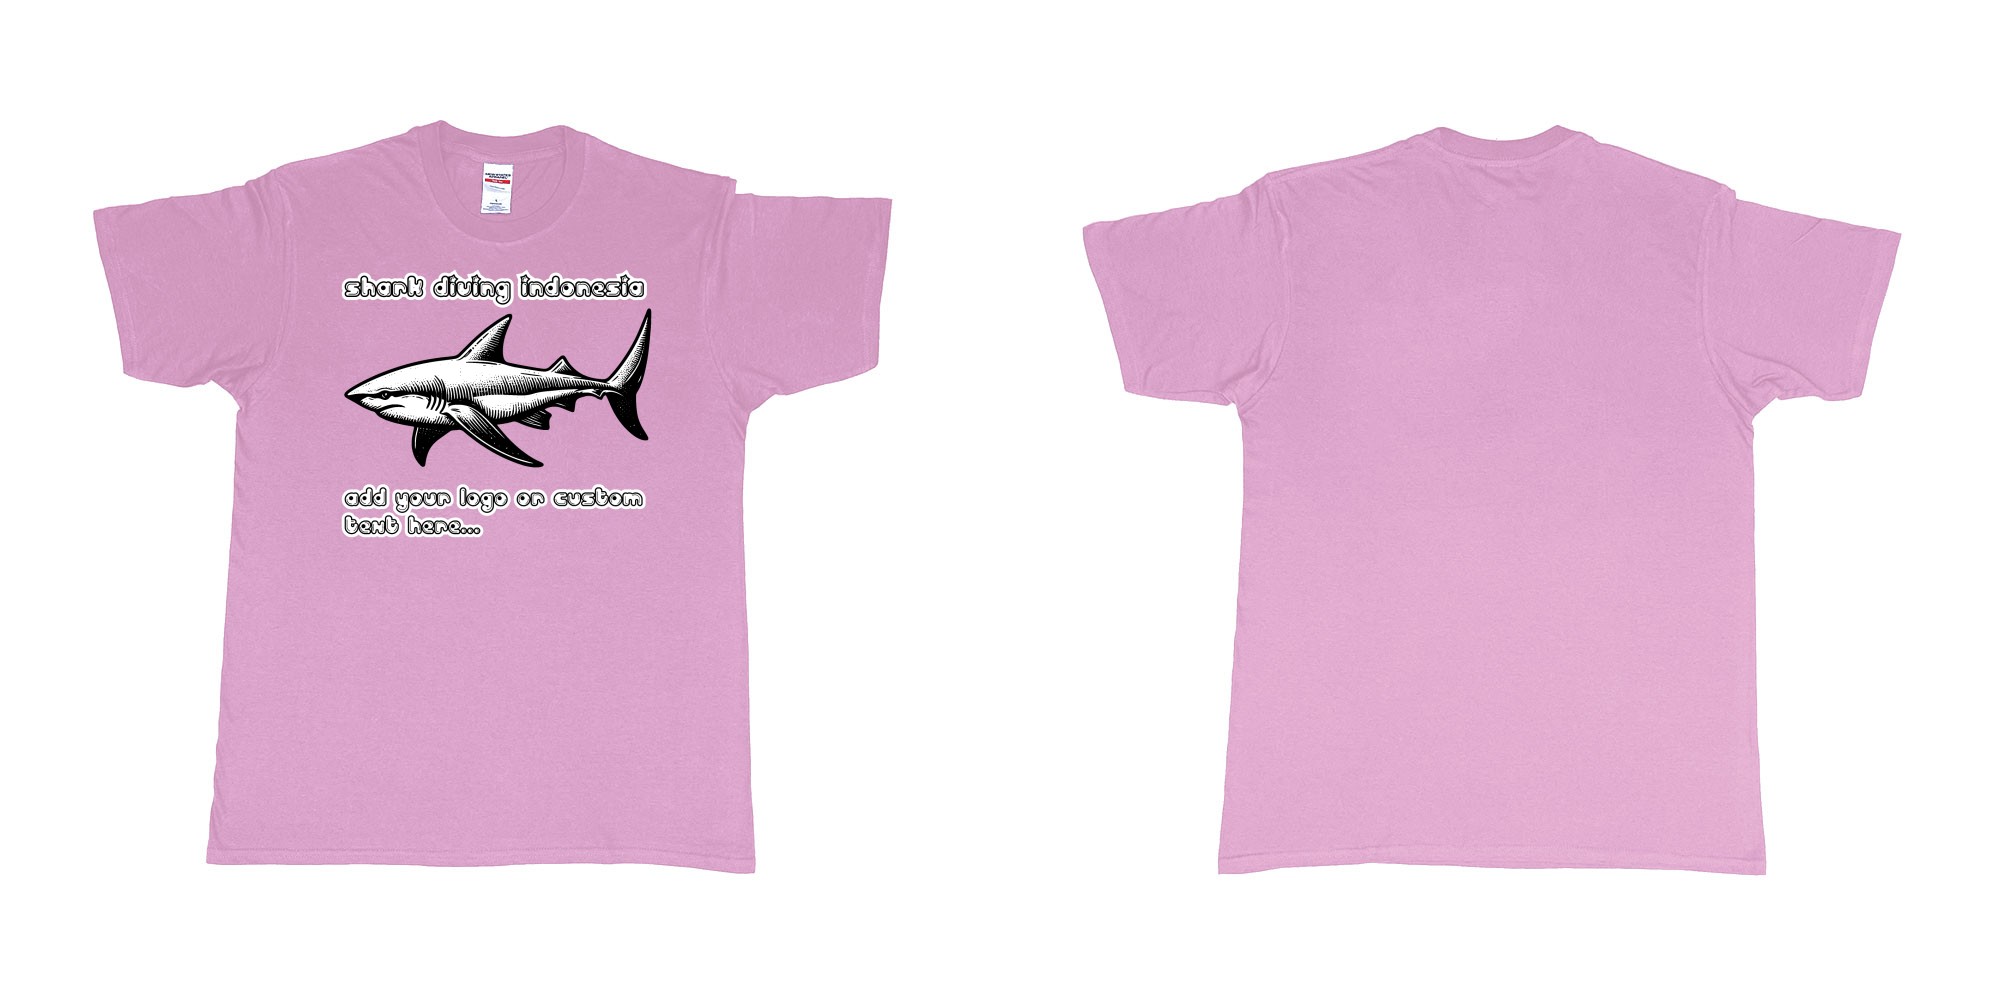 Custom tshirt design shark diving indonesia add own logo text tshirt print in fabric color light-pink choice your own text made in Bali by The Pirate Way